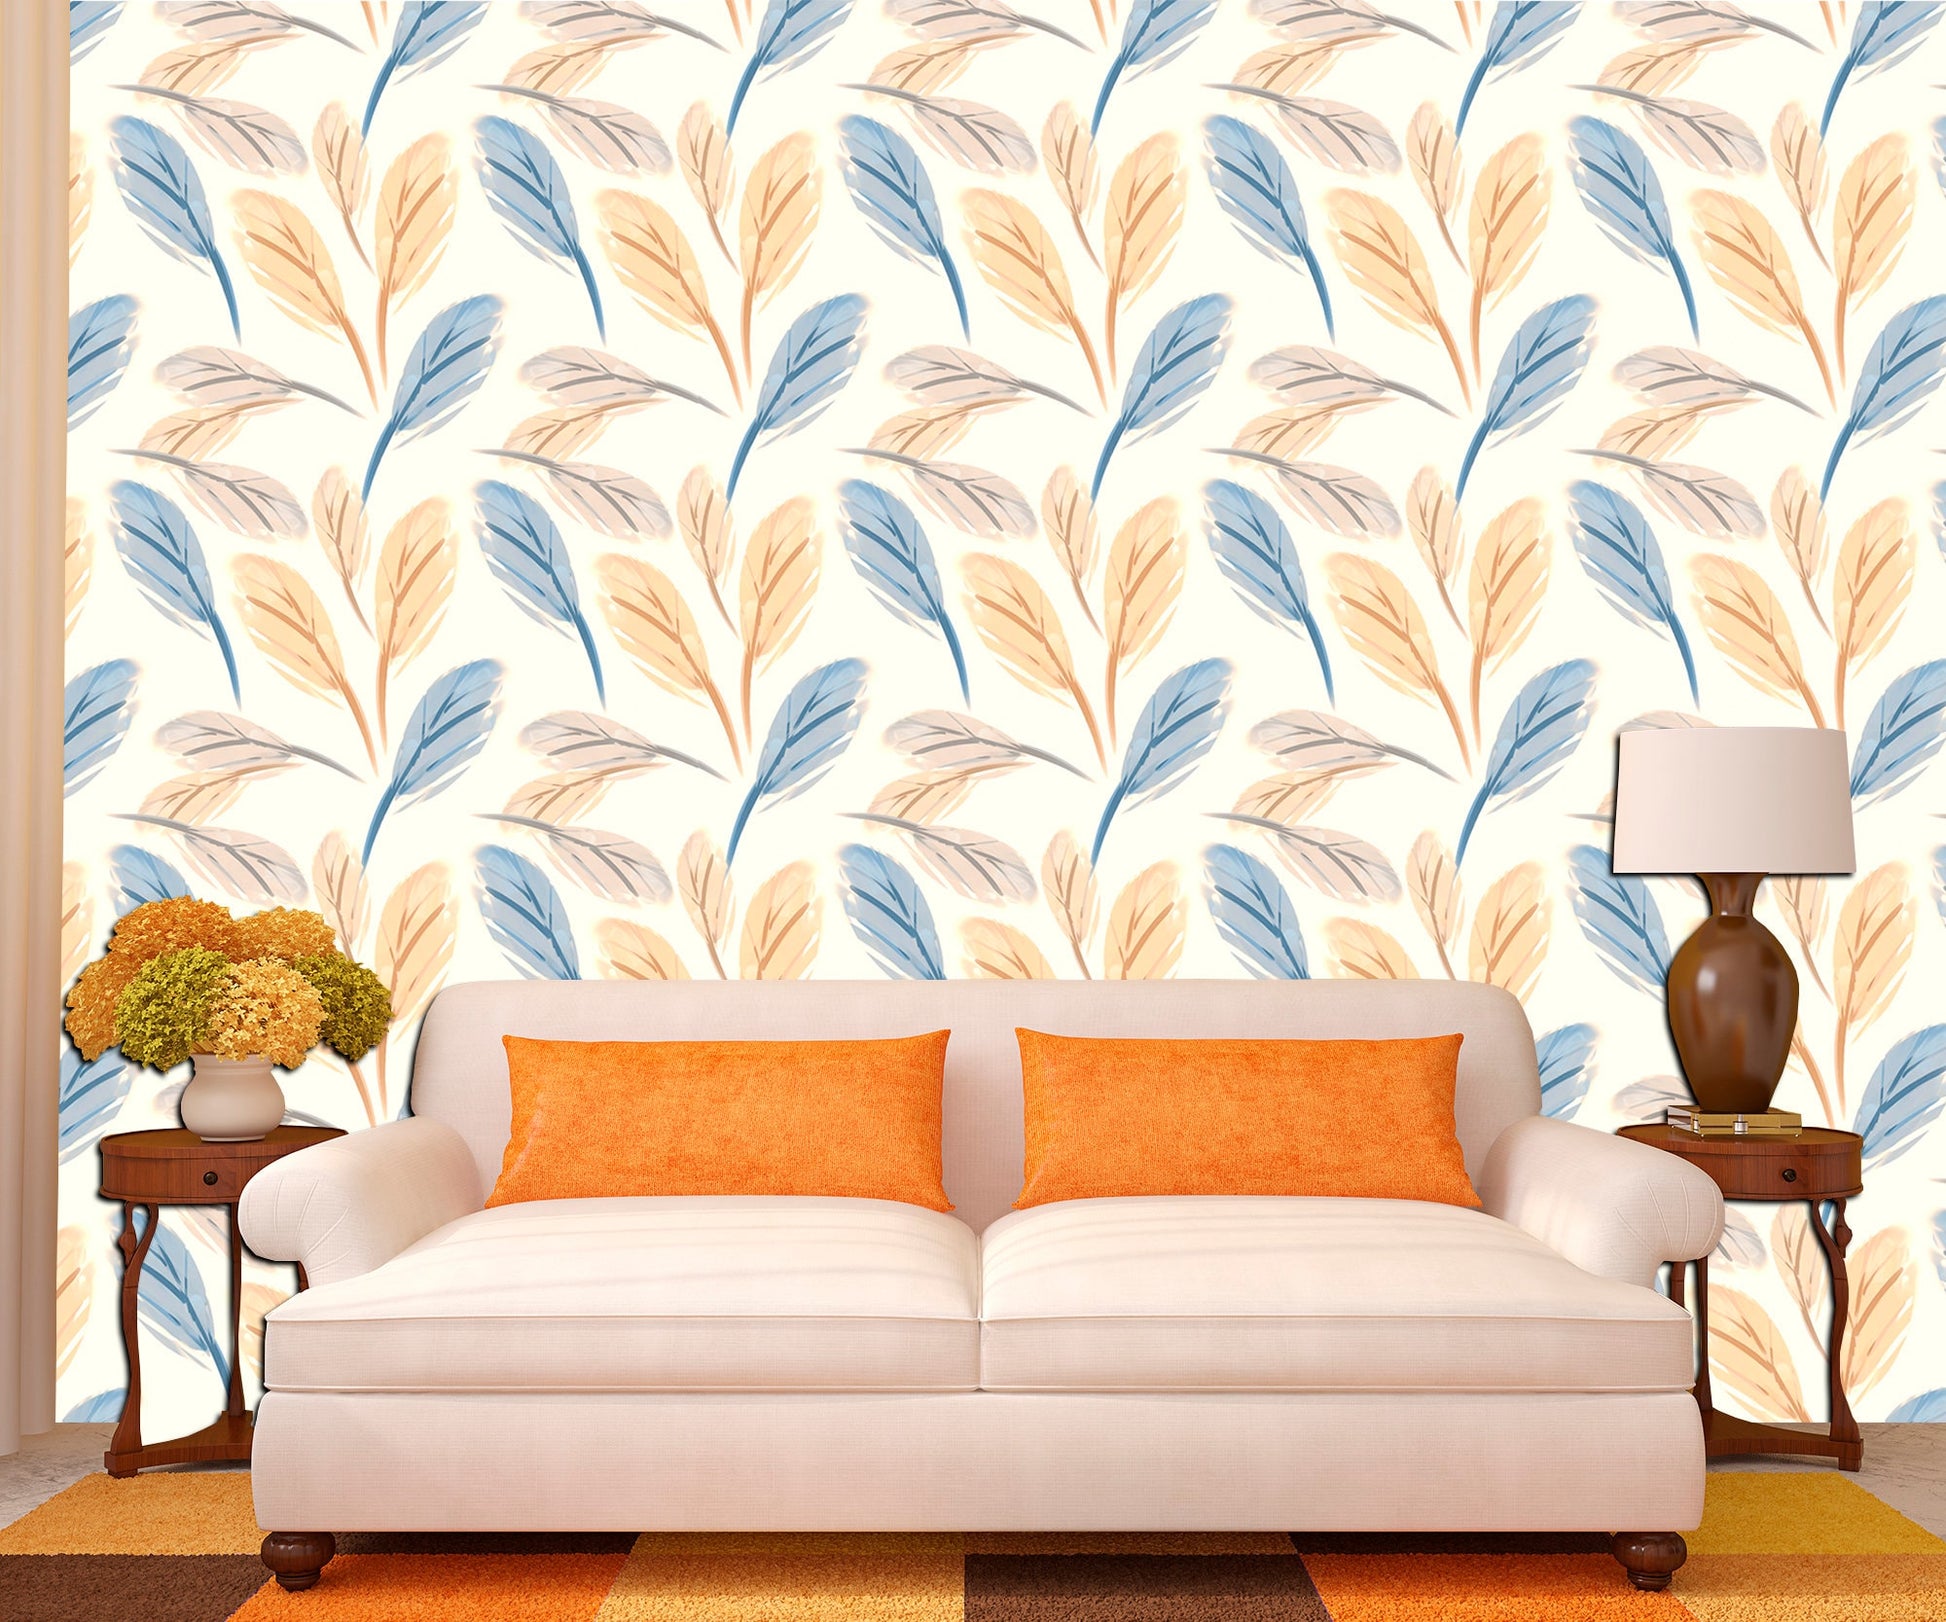 Feather wallpaper Kids room decor Feather watercolor Bohemian wall art, Abstract wallpaper Feather wall decor Peel stick wallpaper